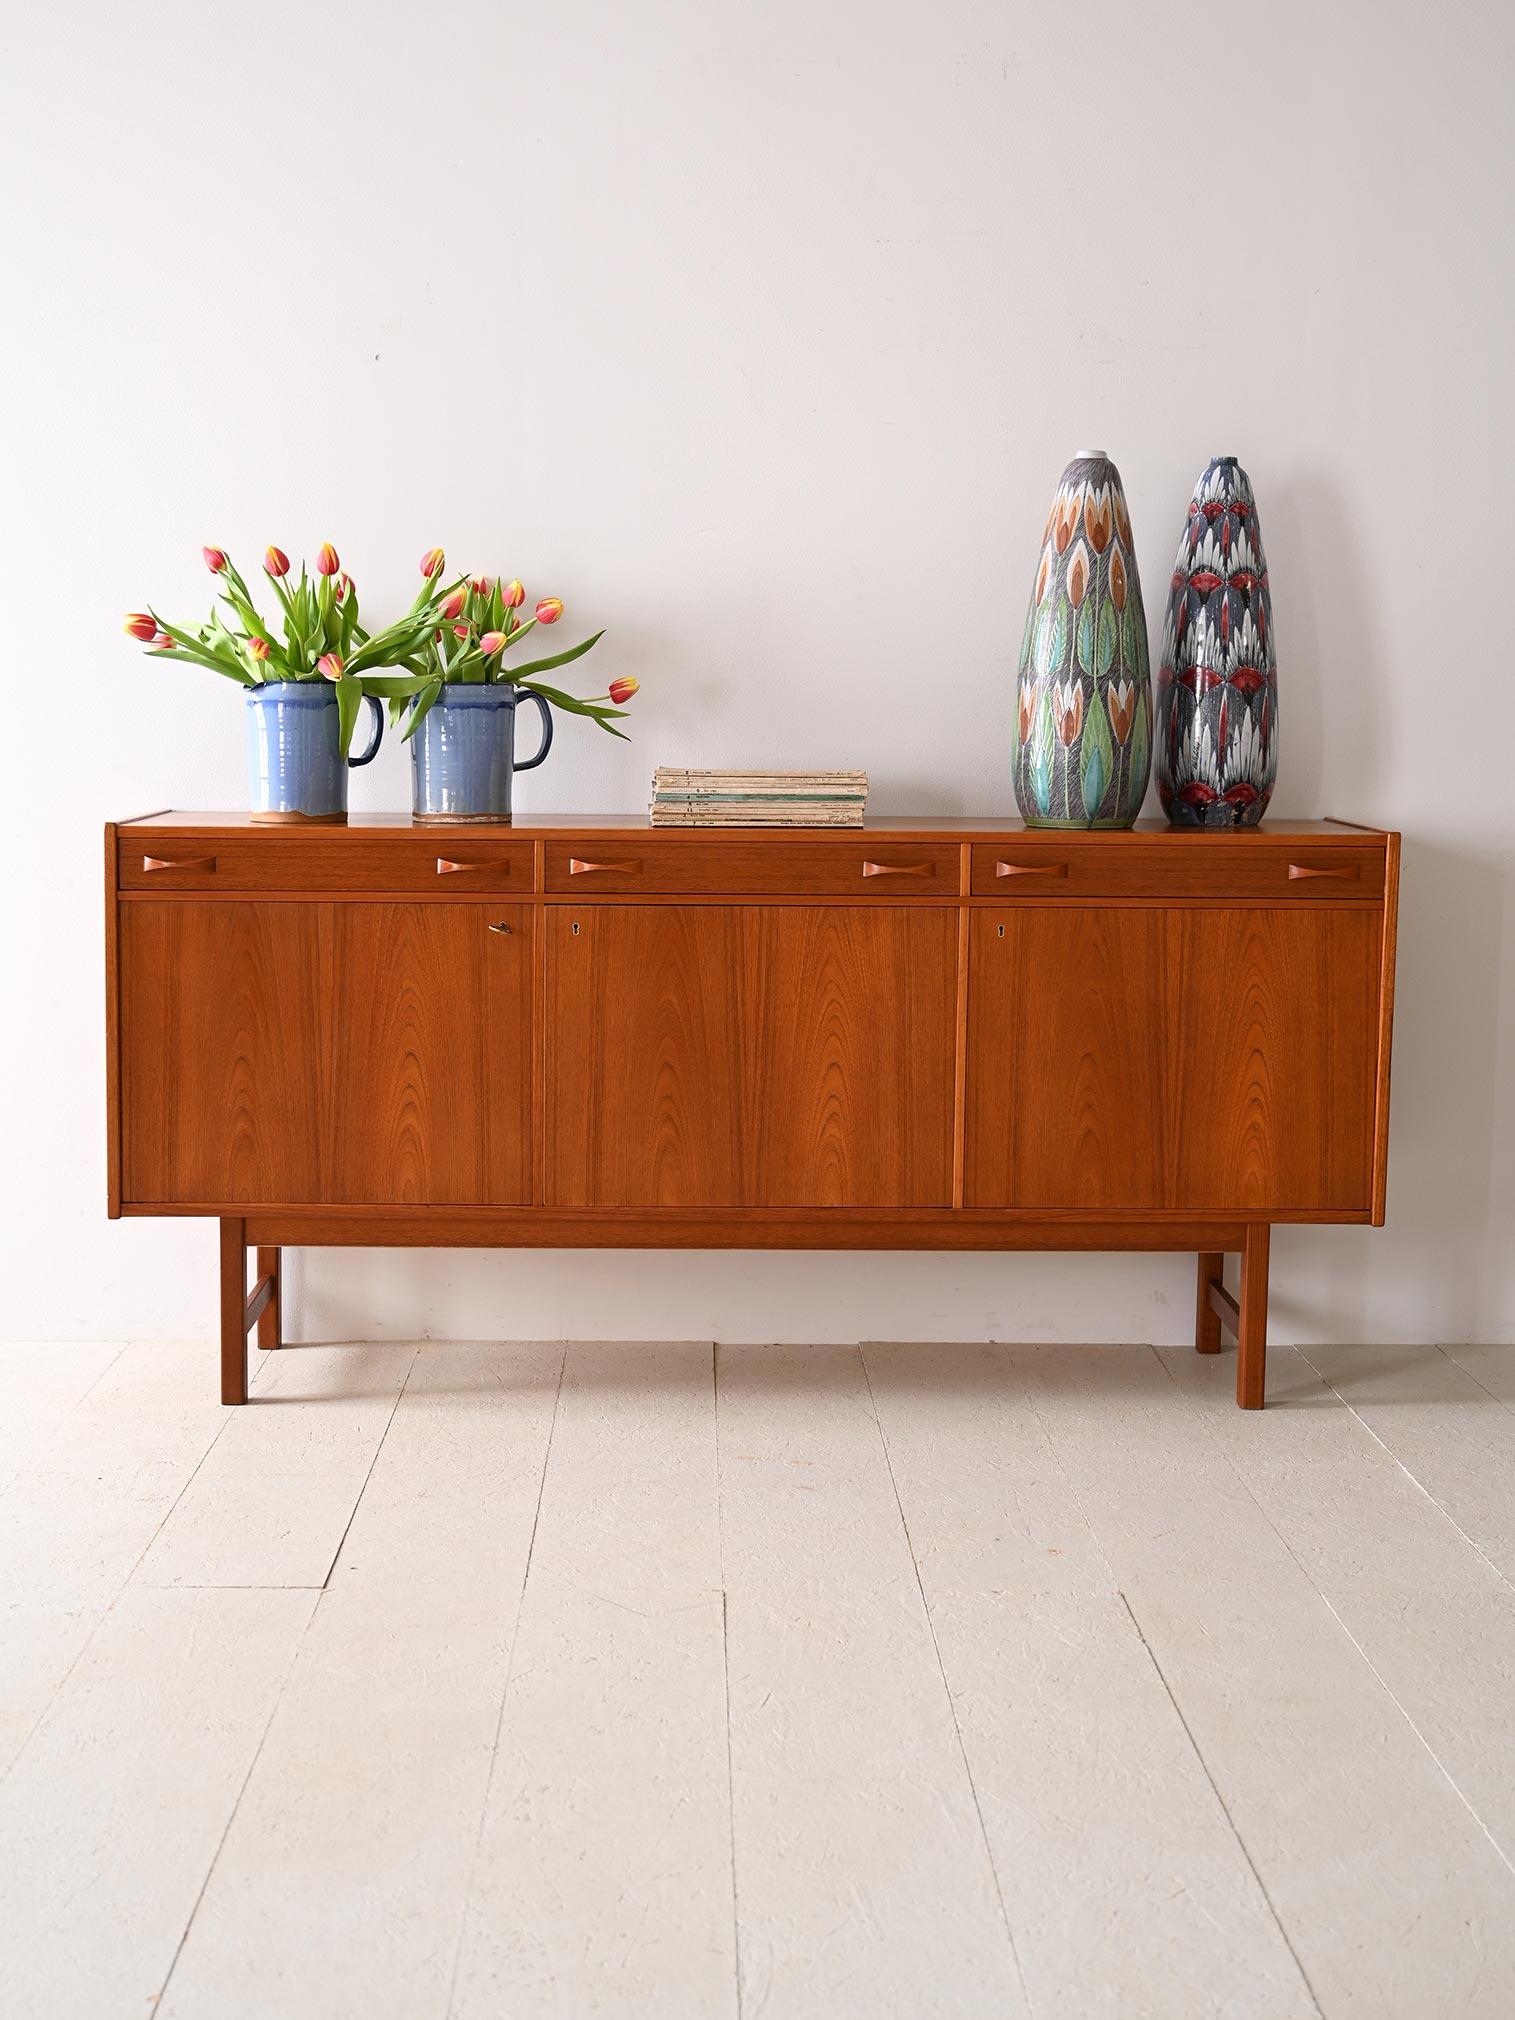 Vintage teak sideboard with doors and drawers.

A design icon characterized by clean, square lines that lend a modern touch to any room. Crafted from fine teak wood in warm, enveloping tones, this piece embodies the quintessential Nordic